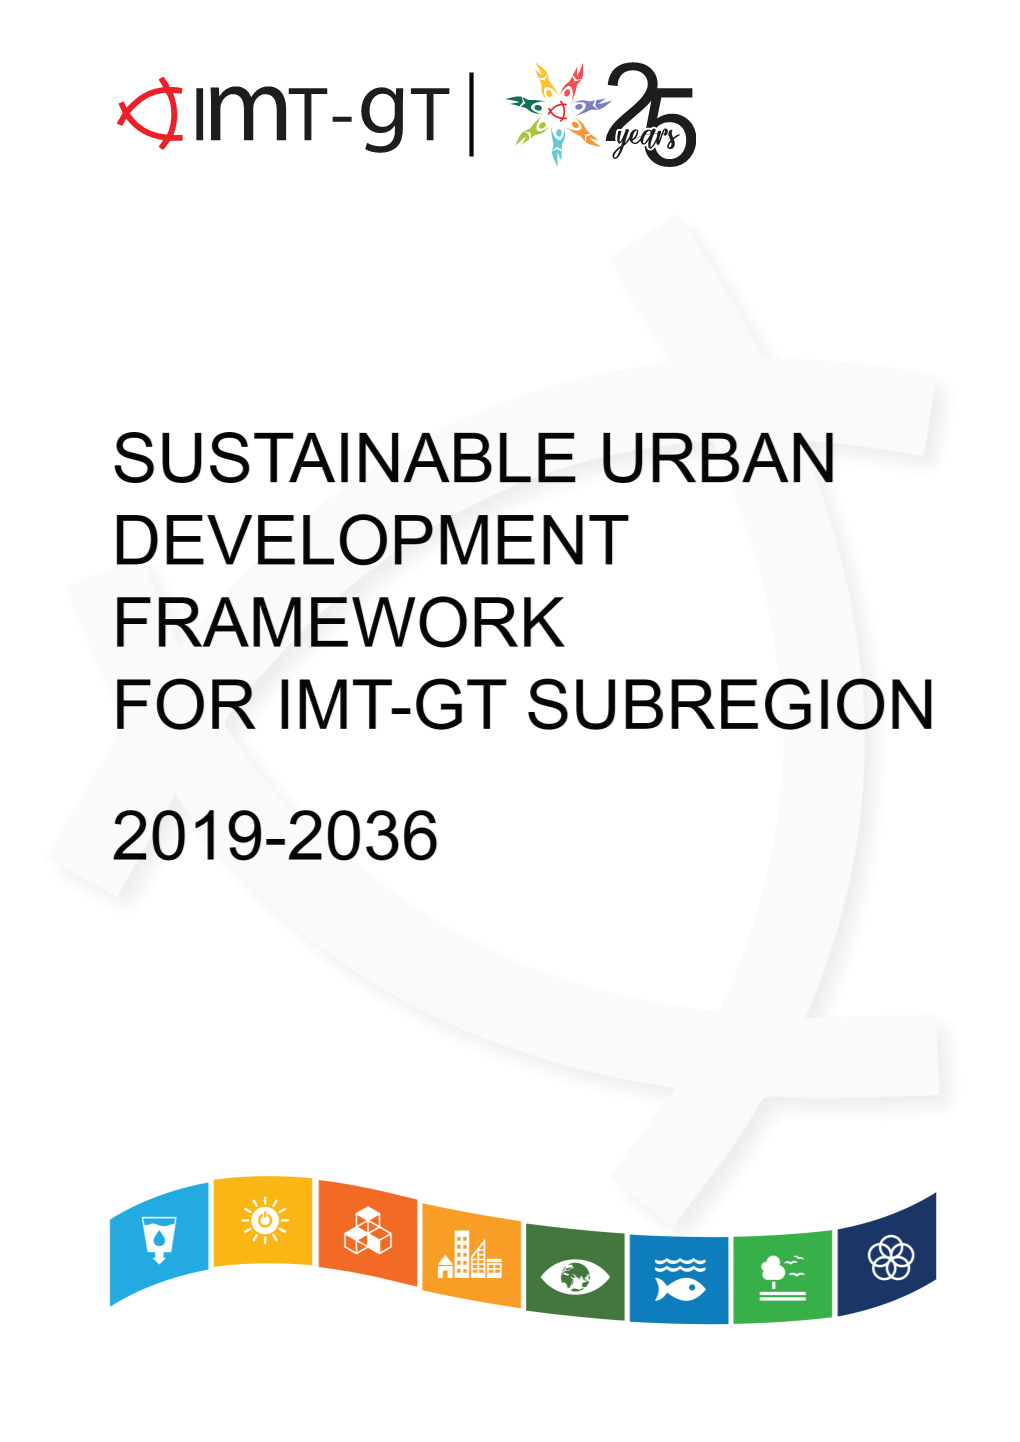 SUDF 2019-2036 Malaysia: Centre for IMT-GT Subregional Cooperation, April 2019